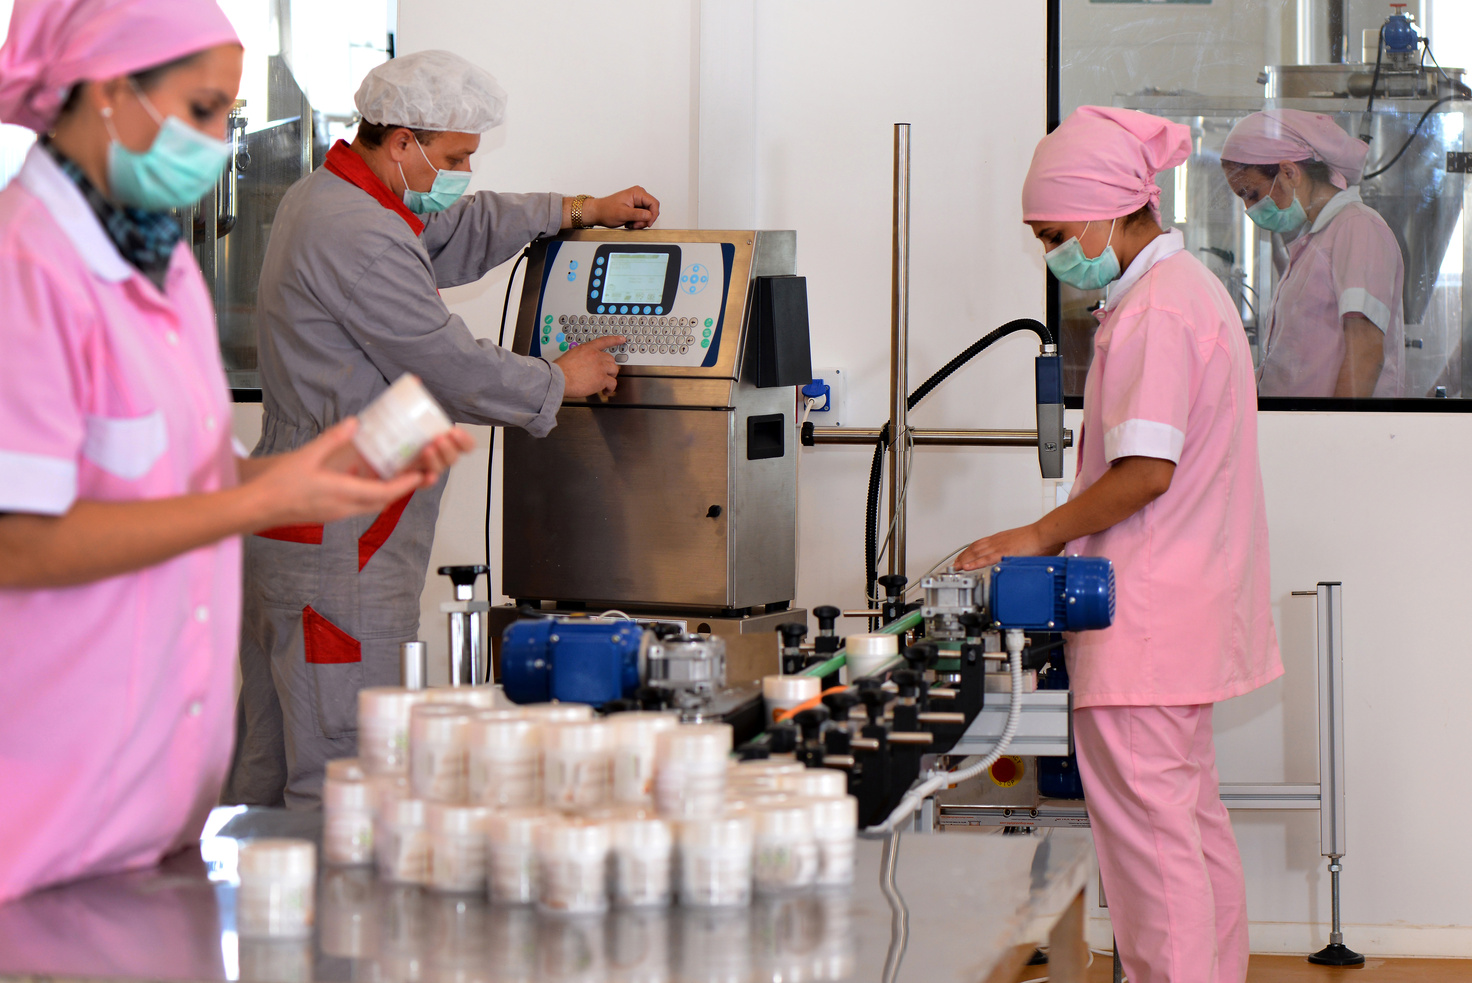 Production line workers in cosmetics factory